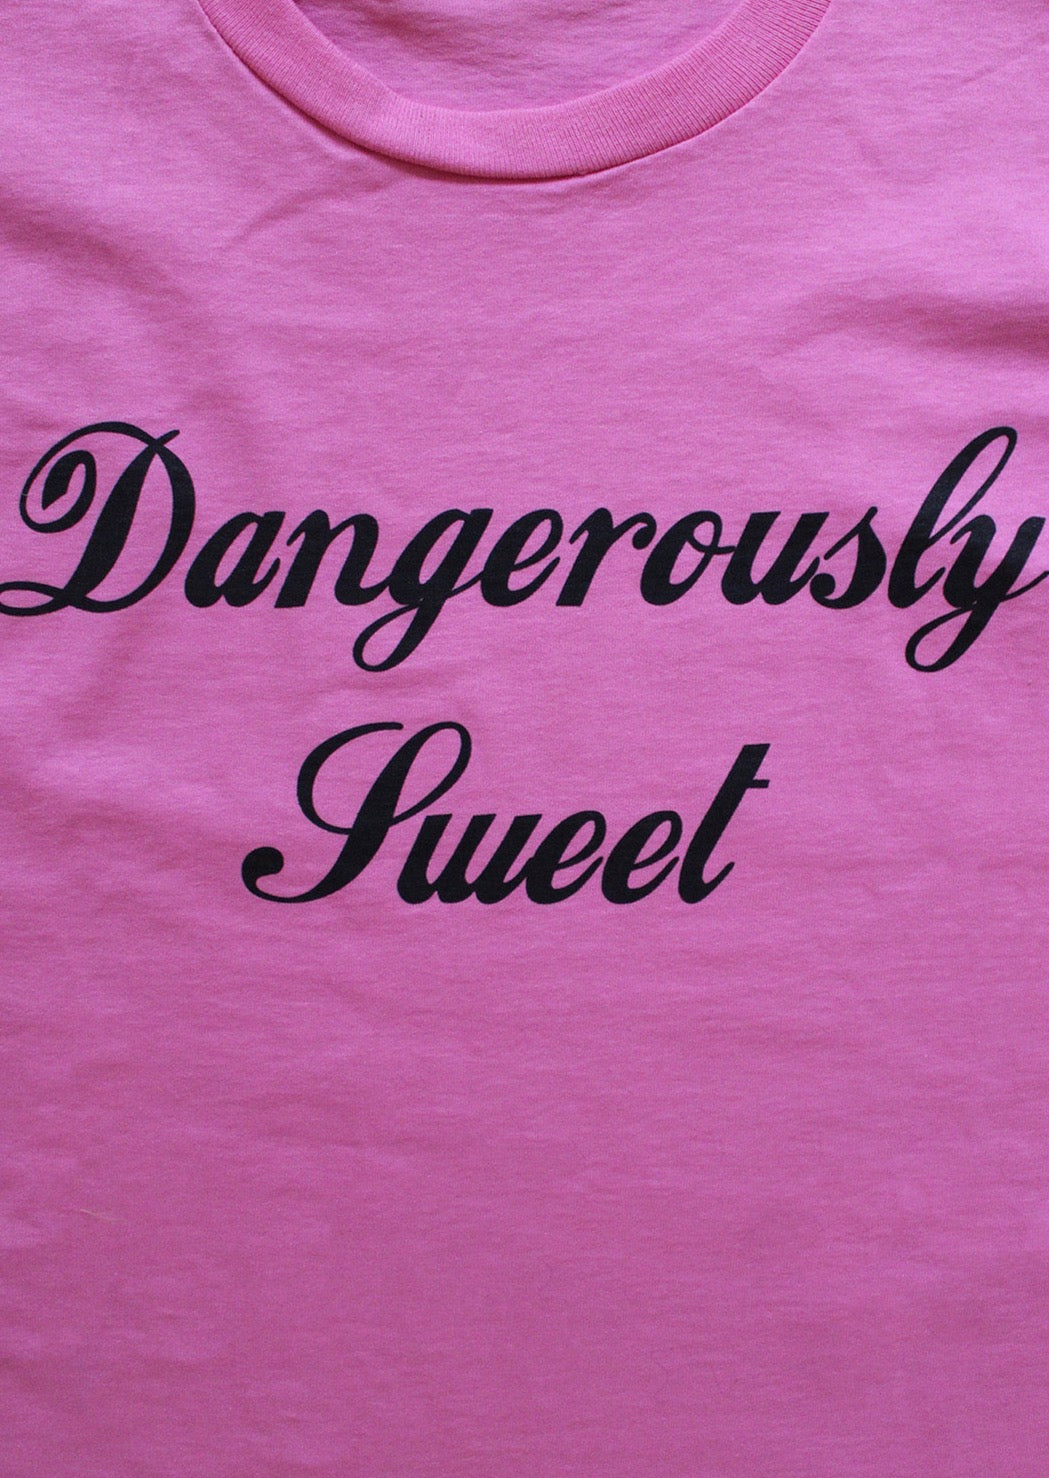 Printed cotton tshirt with "Dangerously Sweet" graphic in vintage cola font.